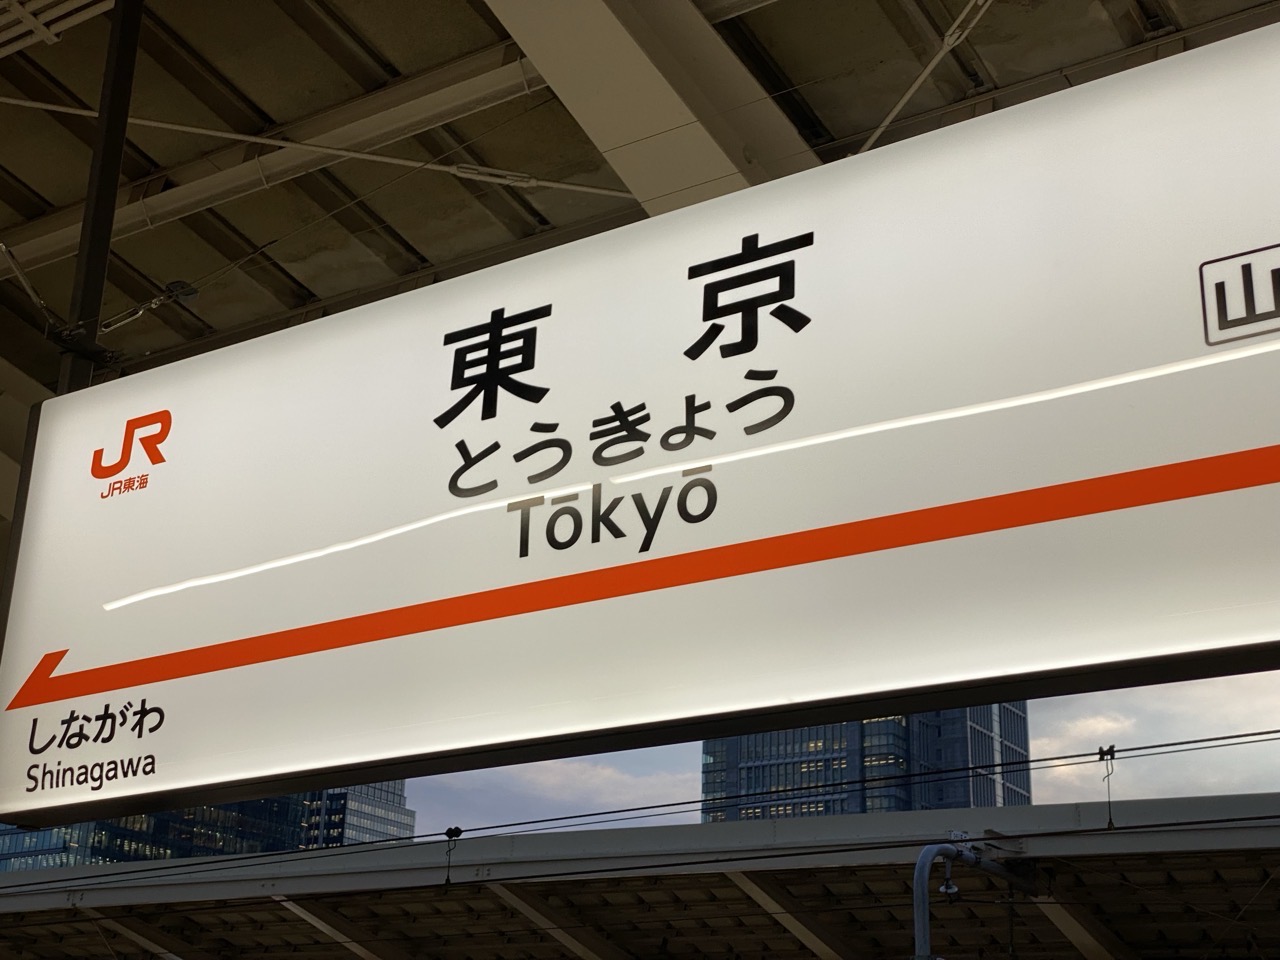 The sign for Tokyo at the train station. It says Tokyo in kanji, hiragana and Latin script